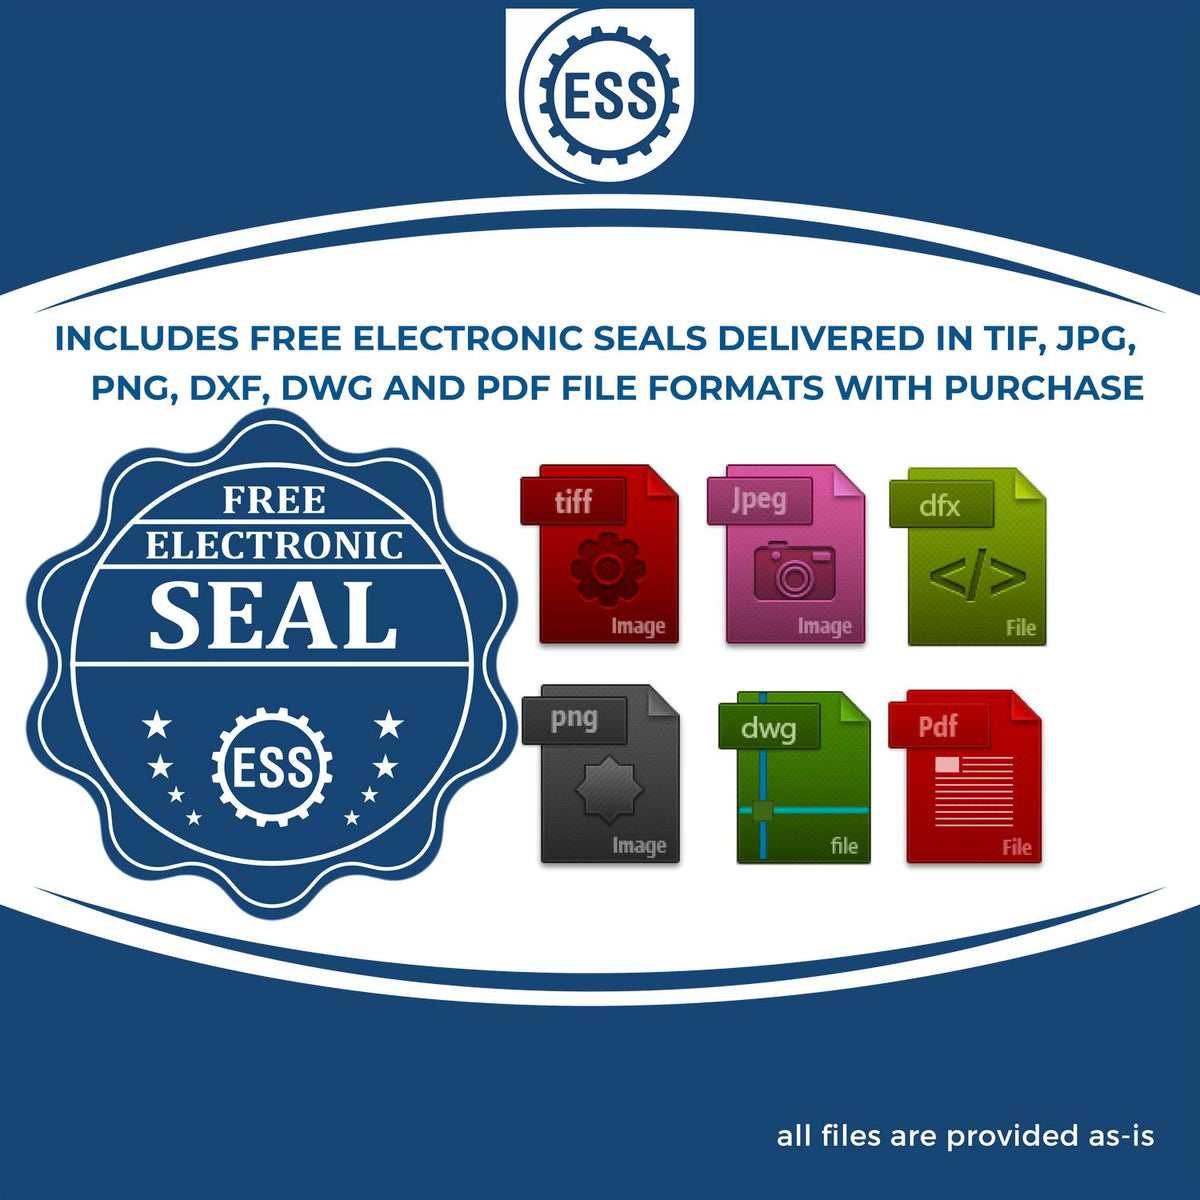 An infographic for the free electronic seal for the Slim Pre-Inked Idaho Landscape Architect Seal Stamp illustrating the different file type icons such as DXF, DWG, TIF, JPG and PNG.